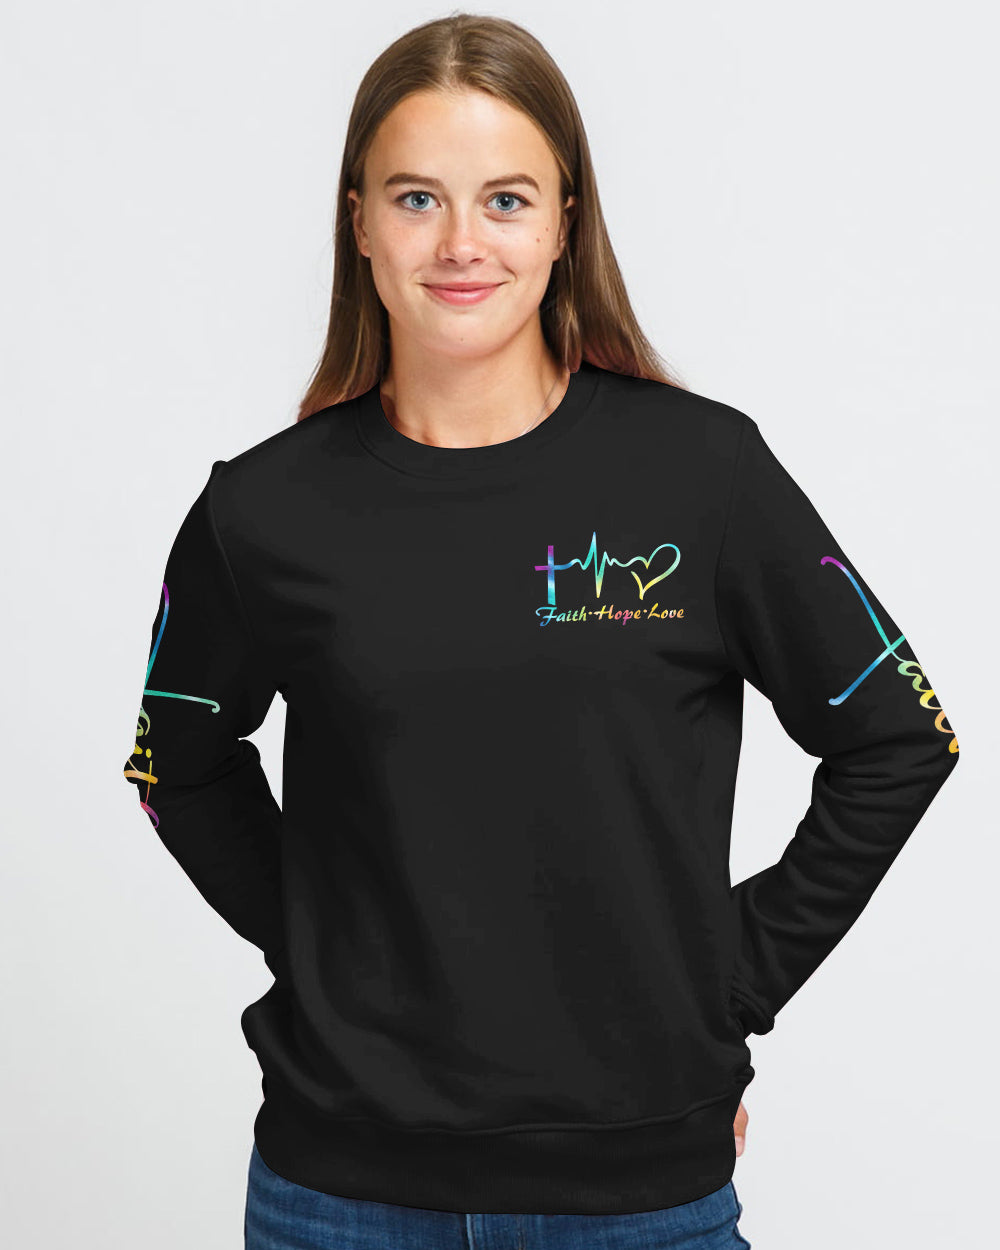 I Can Do All Things Wings Colorful Women's Christian Sweatshirt